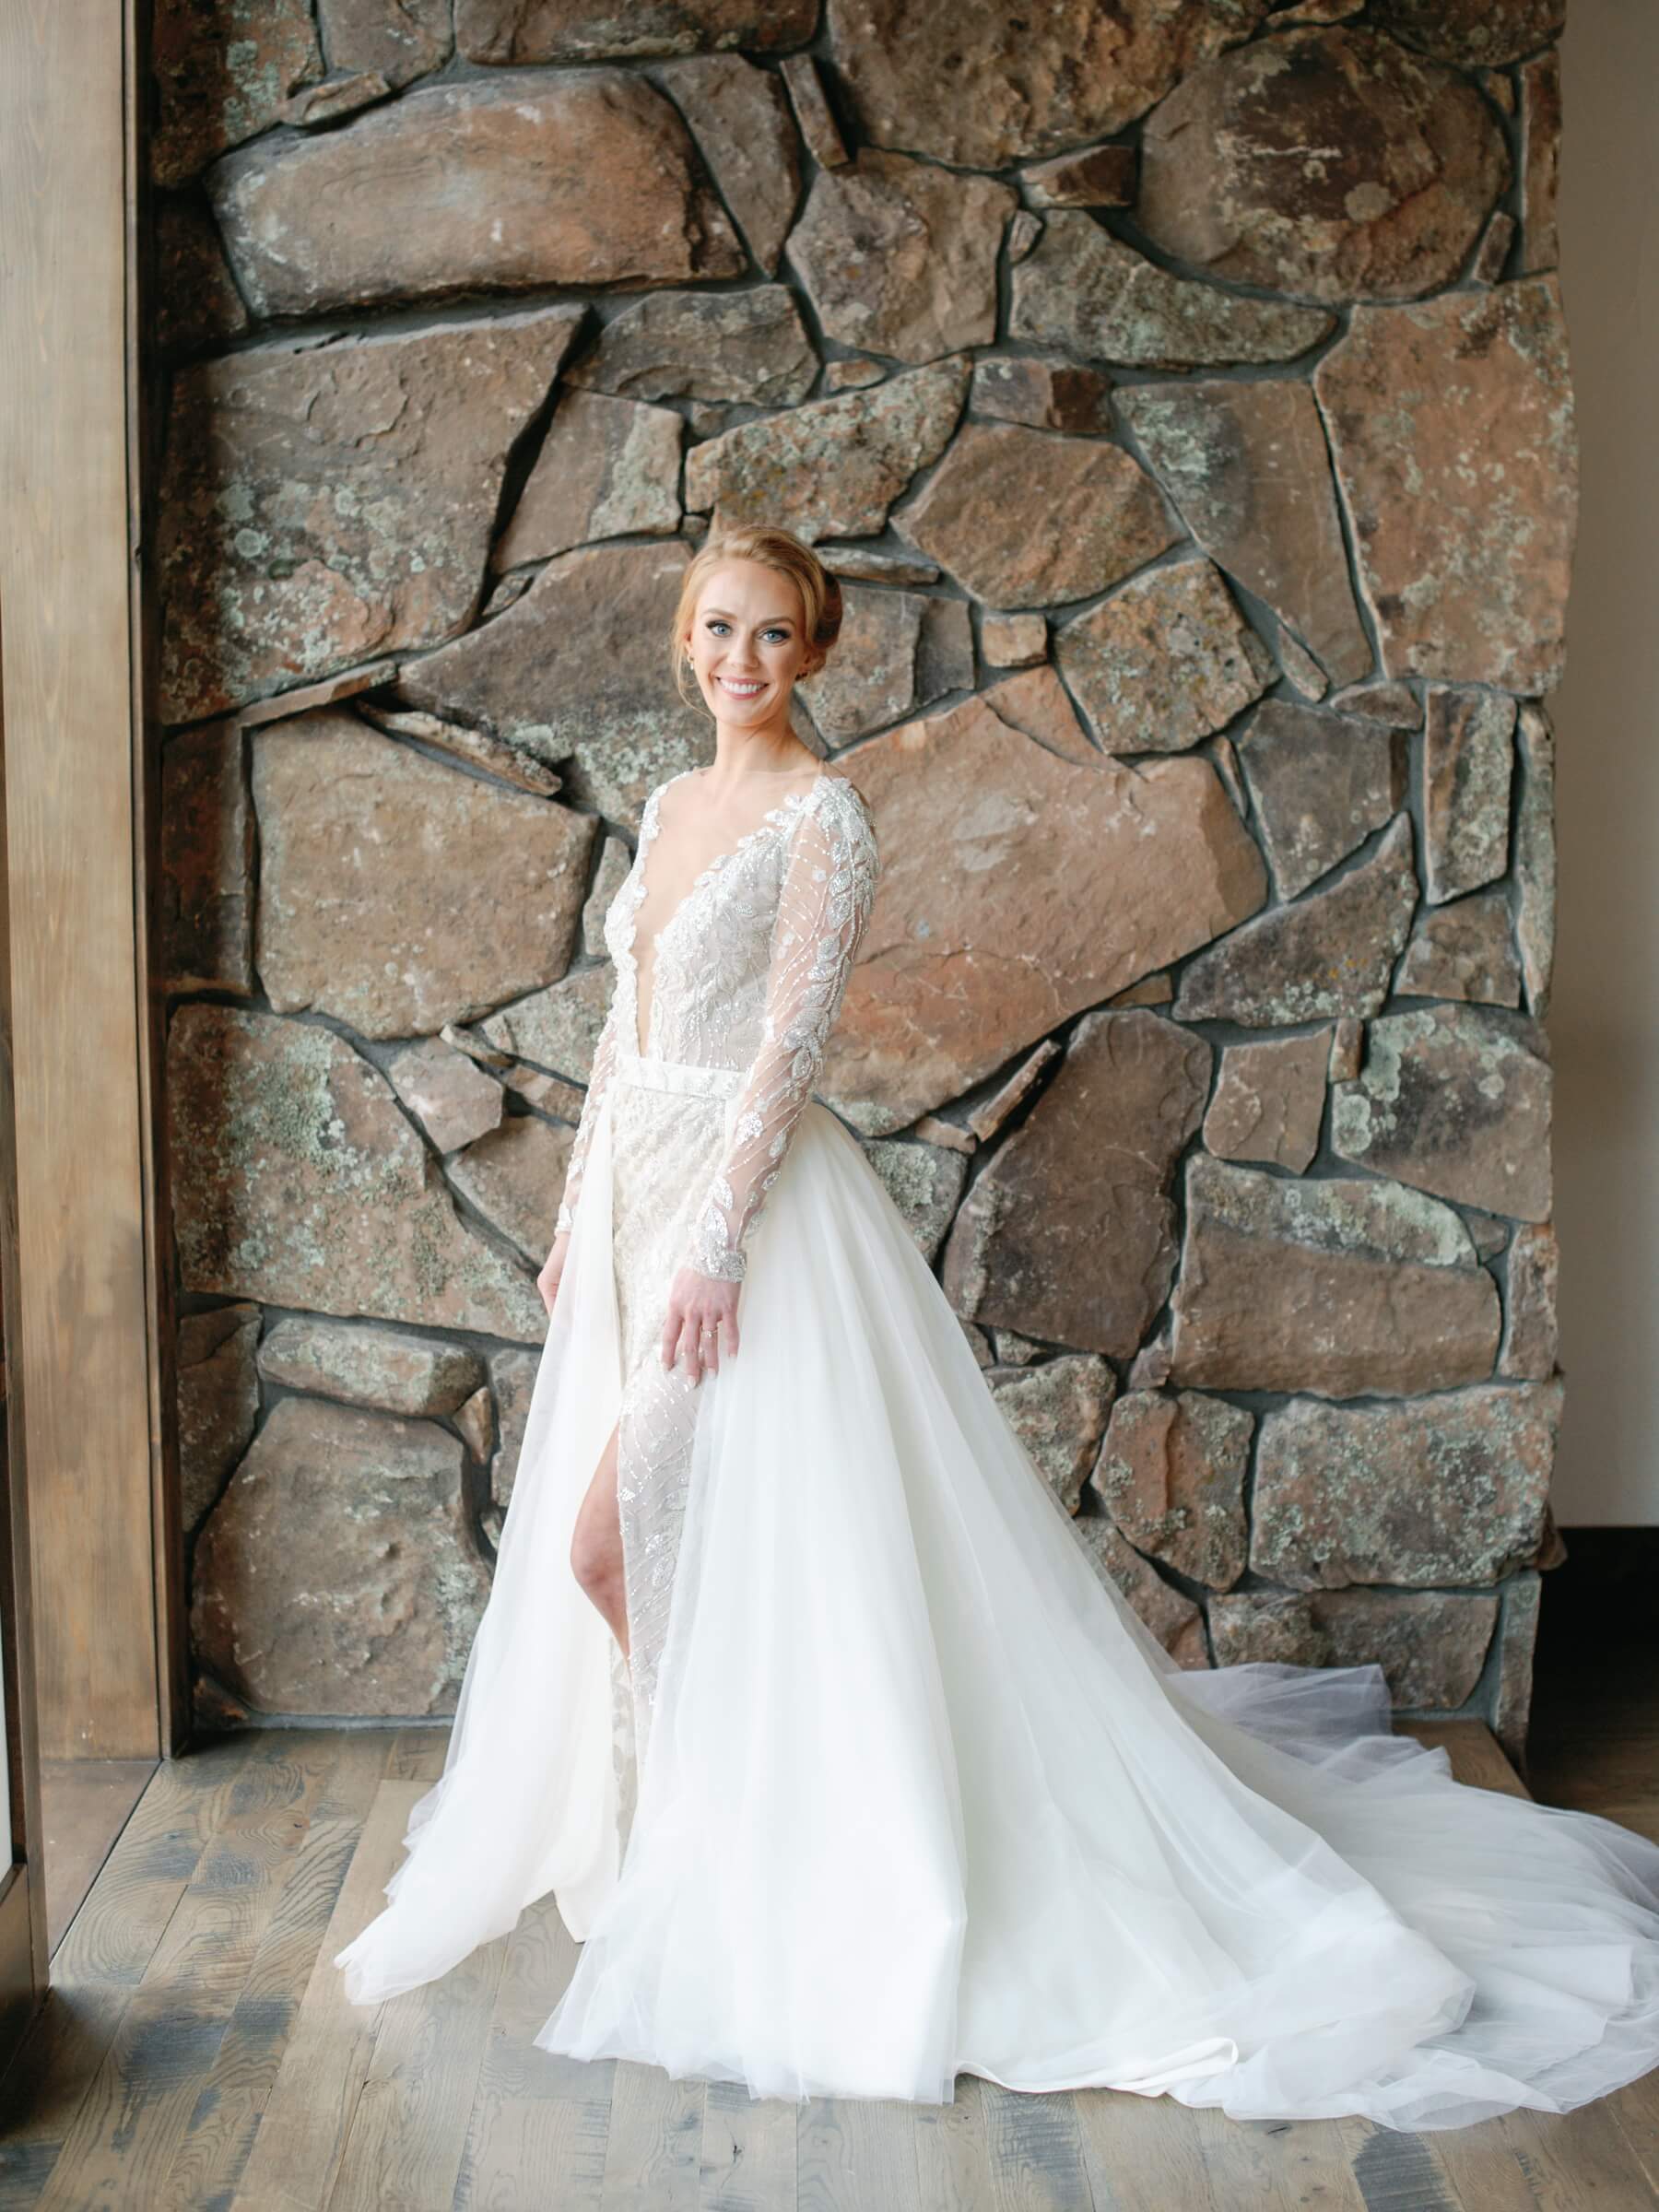 Bride wearing dress with detachable skirt